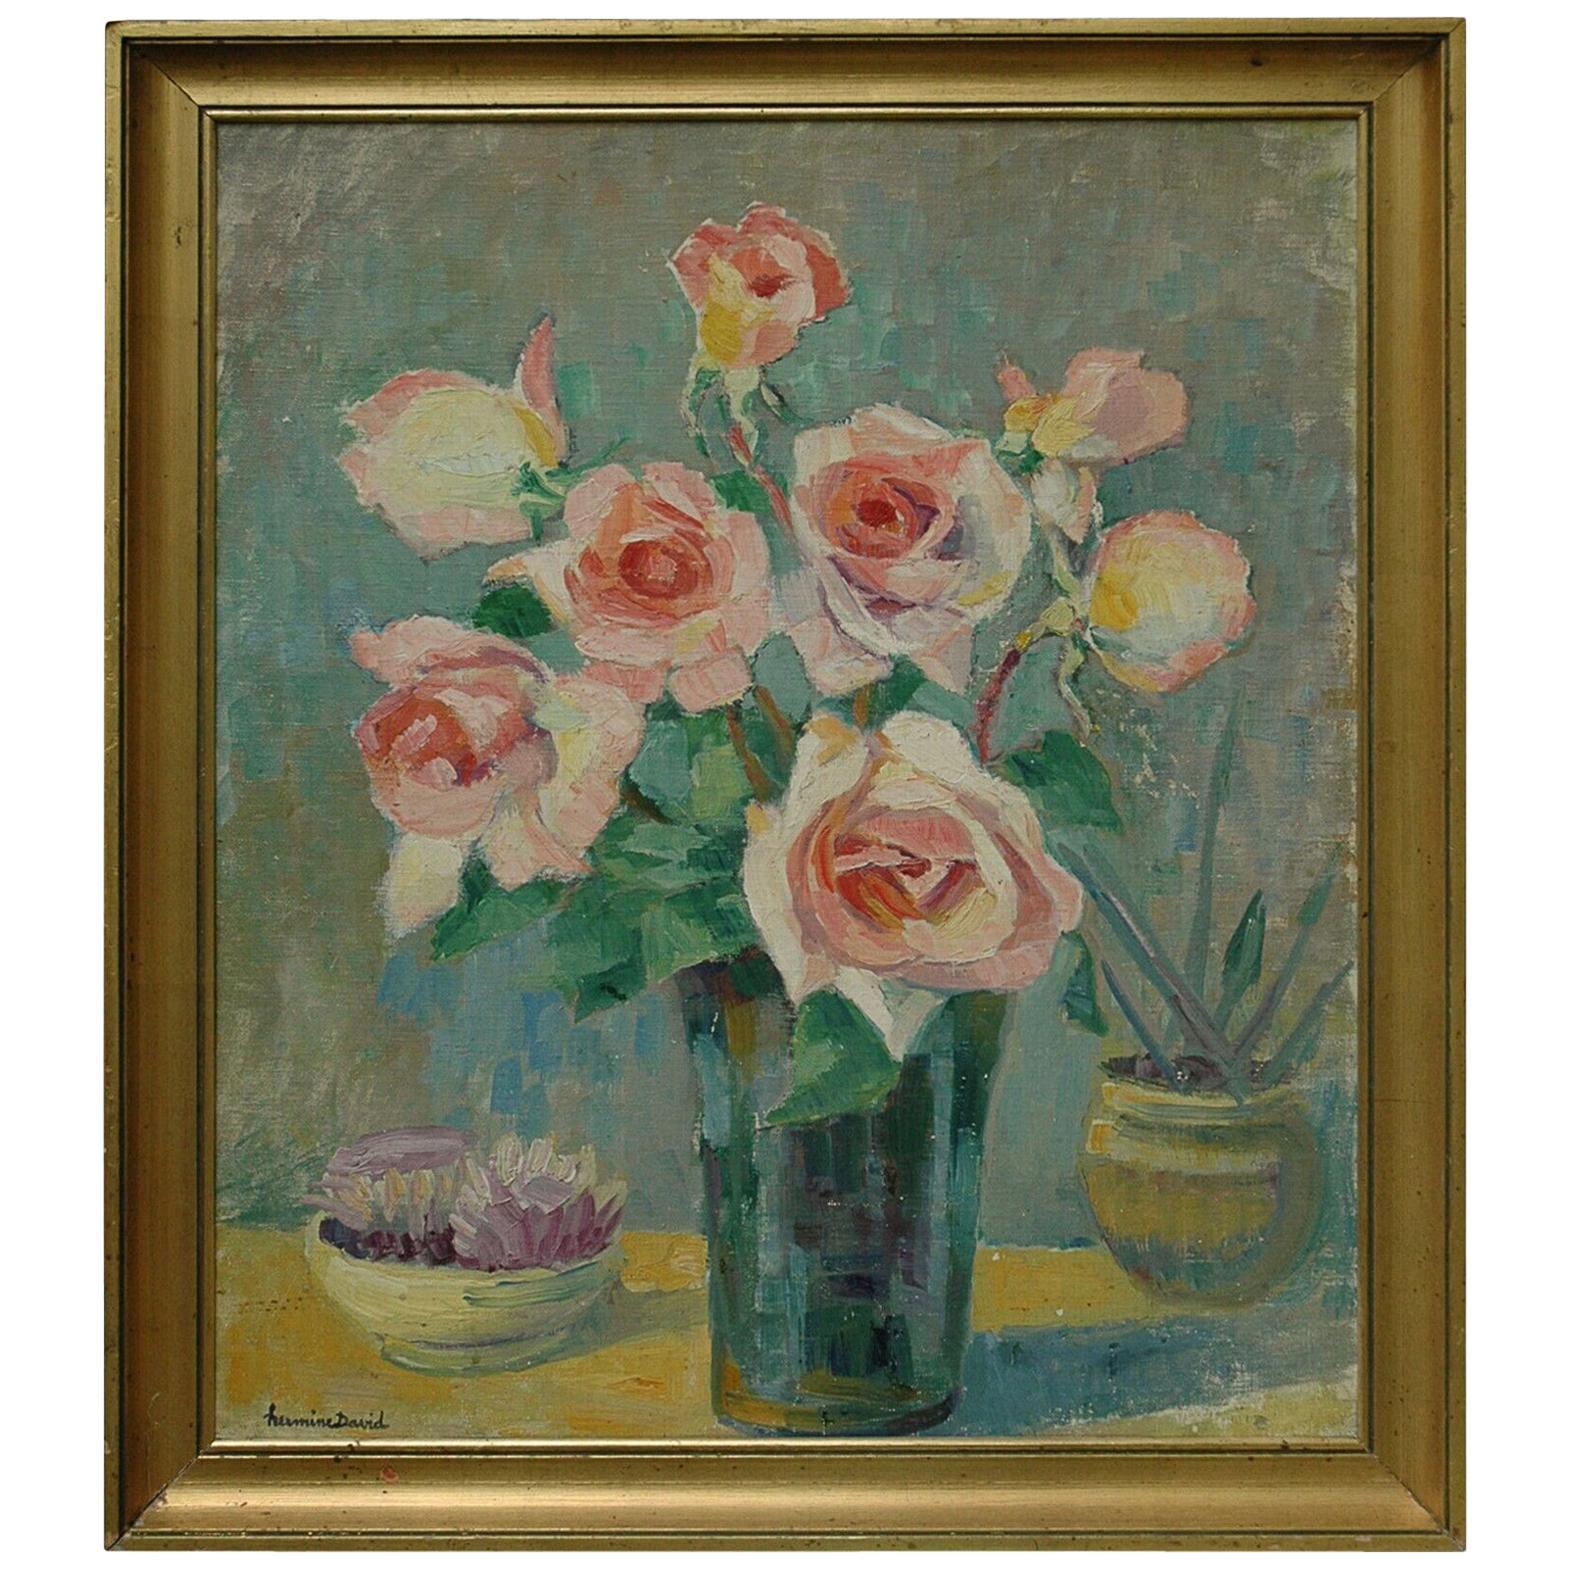 Bouquet of Roses by Hermine David, Oil on Cardboard Linen, Signed